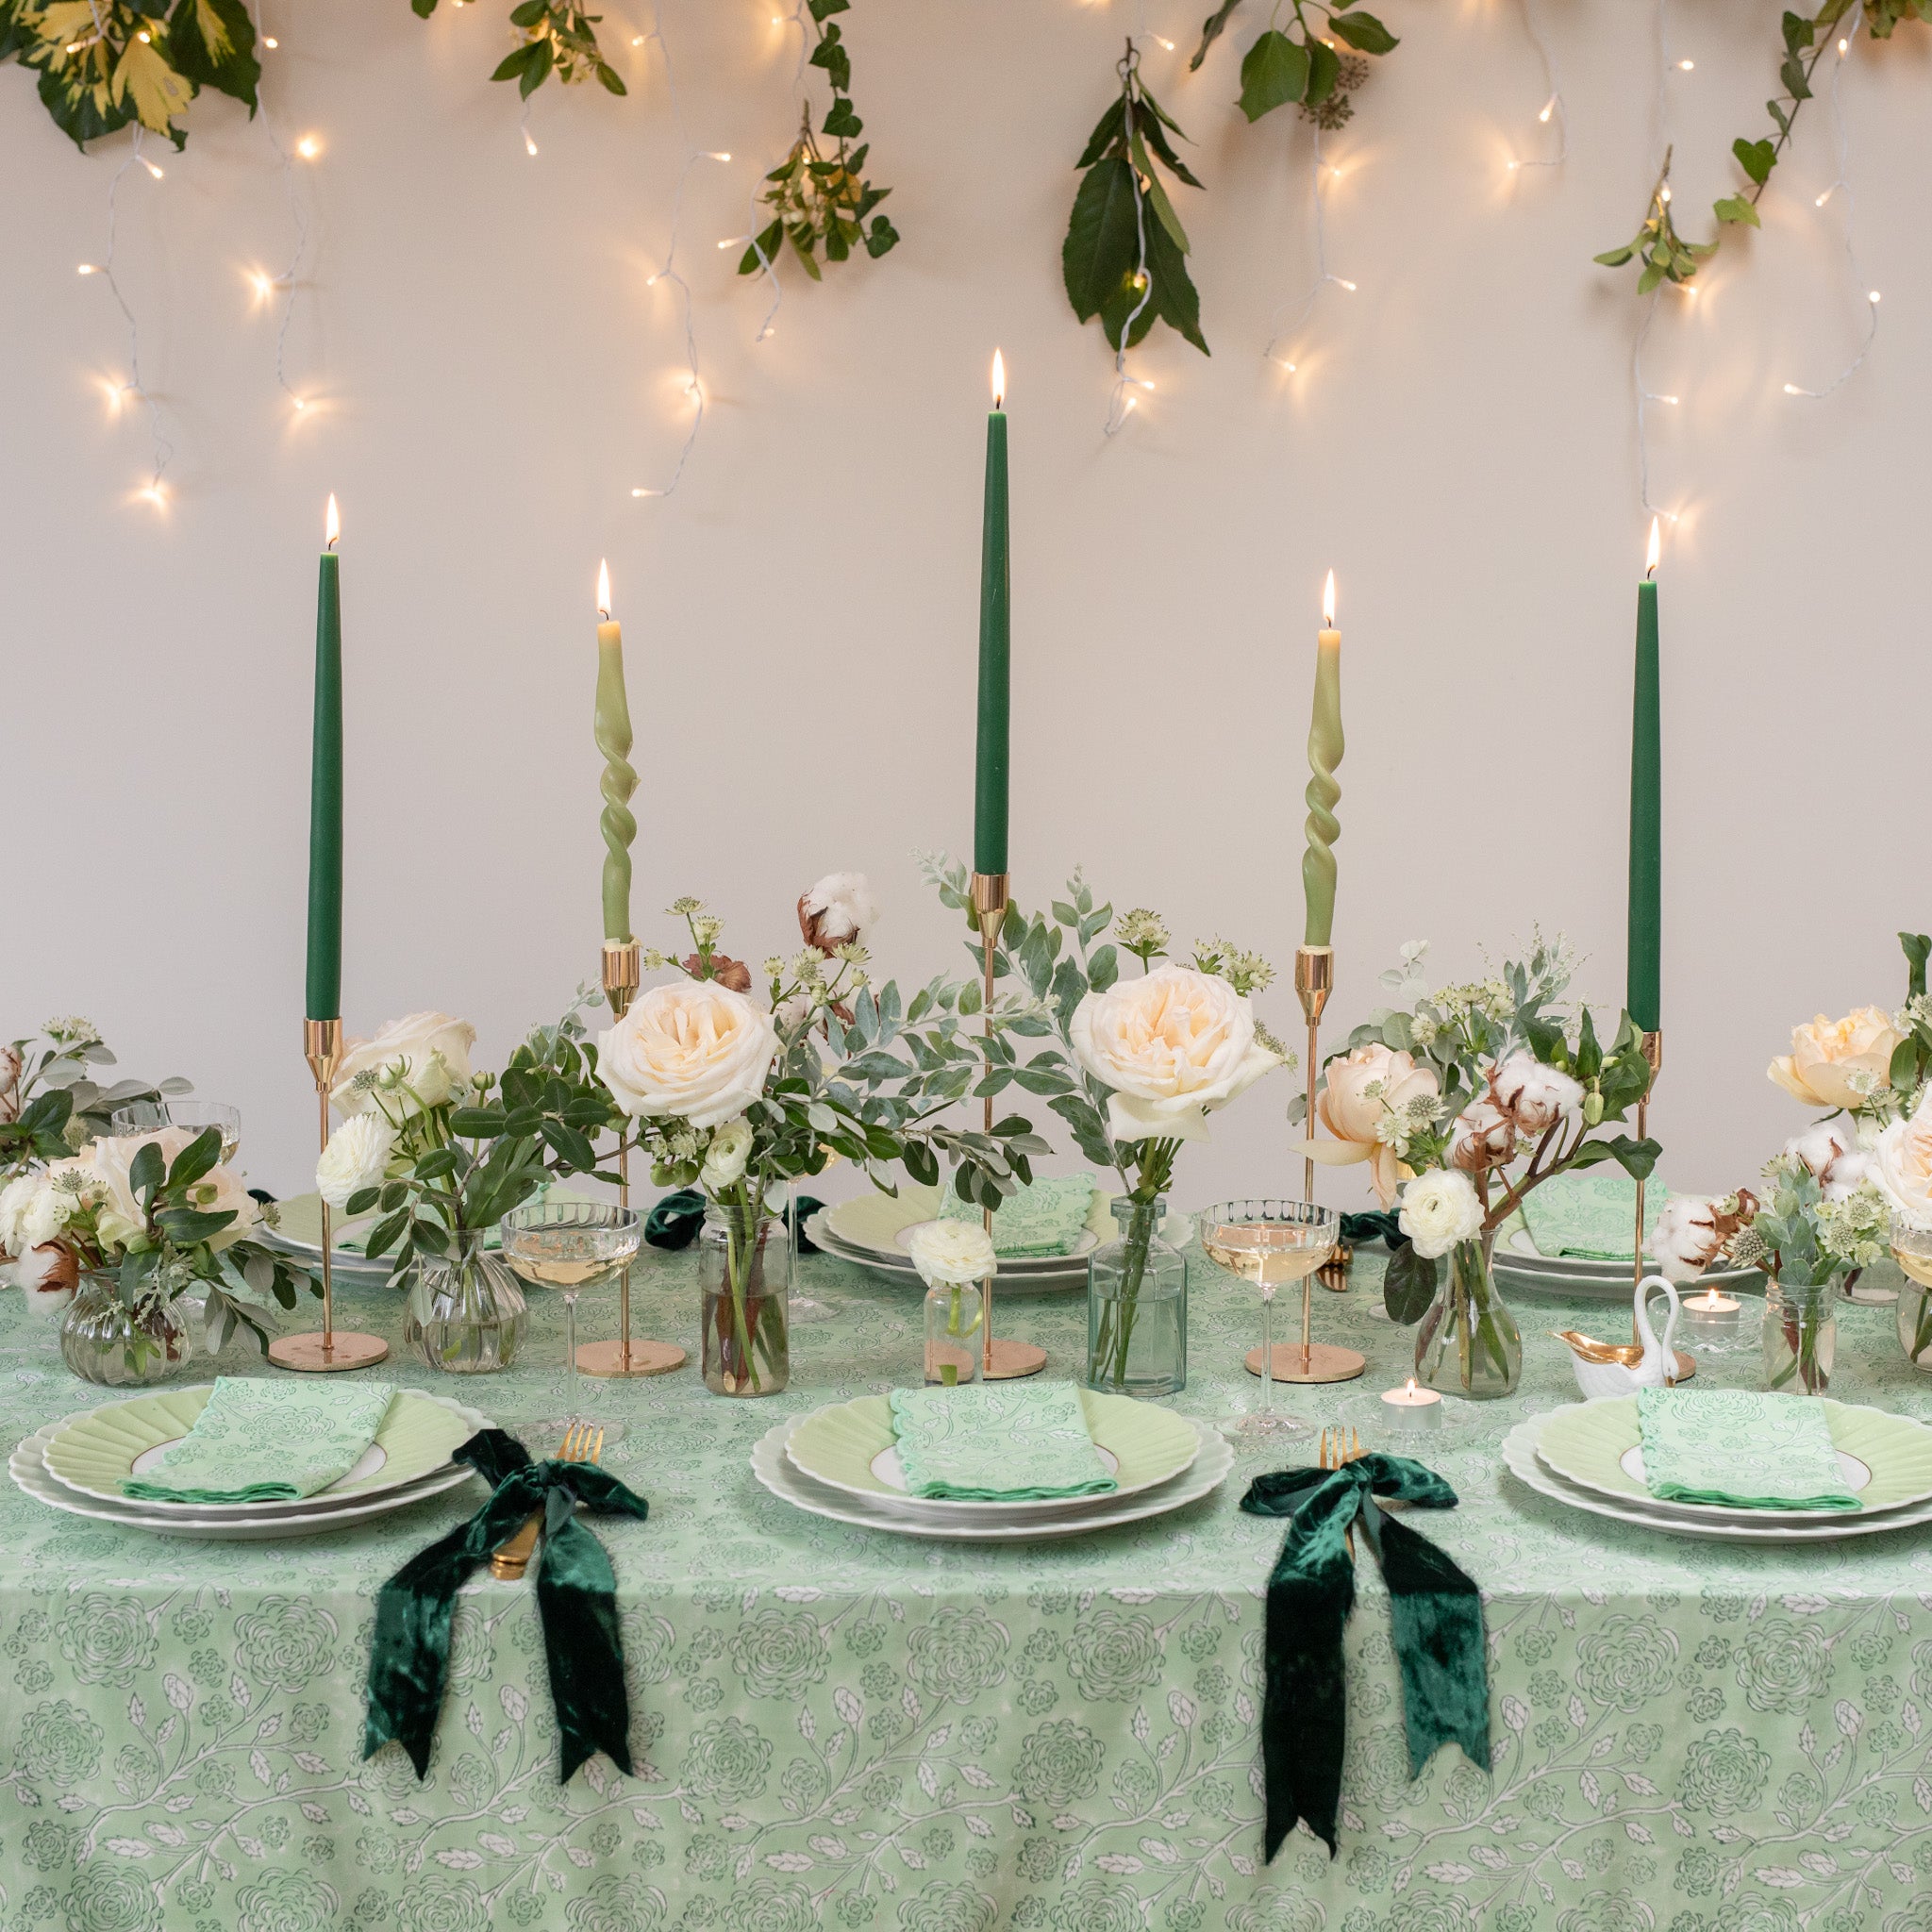 Festive Tablescape At Home